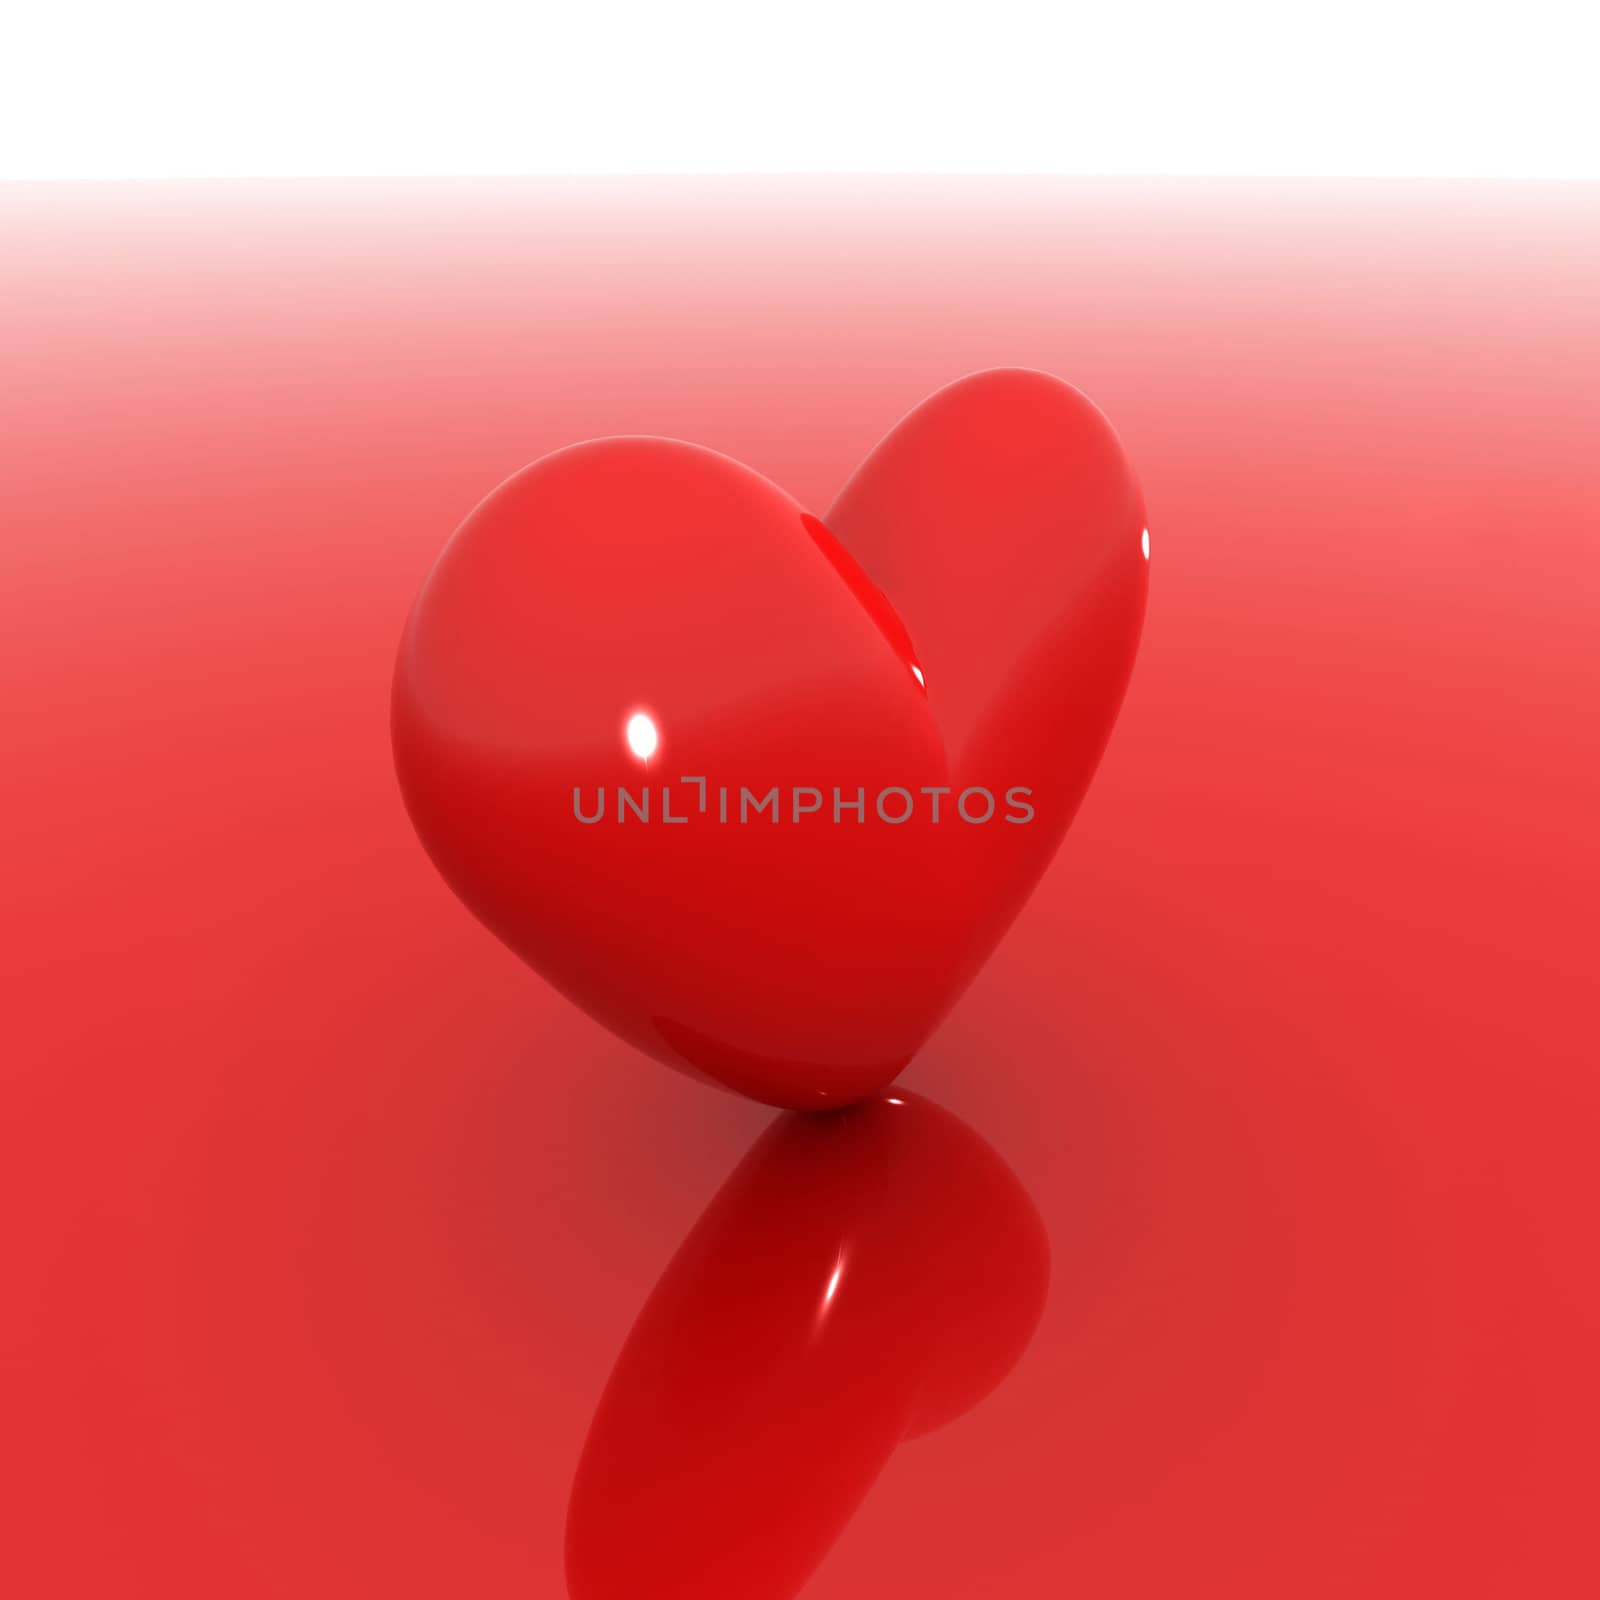 A Colourful 3d Rendered Red Heart Illustration